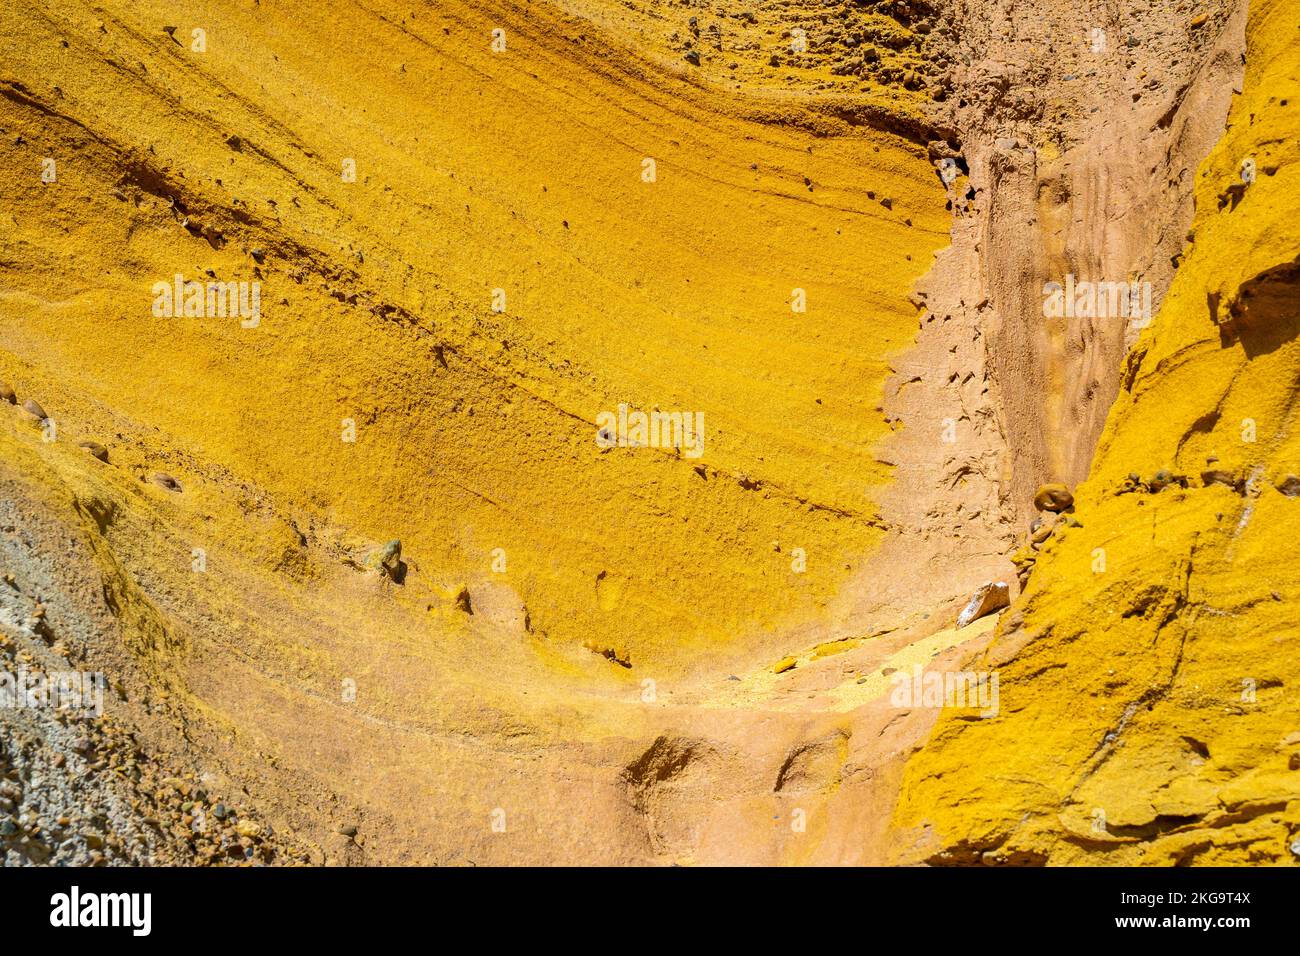 Multicolored yellow, mustard, honey colored colourful colorful rock slope texture weathering and erosion, patterns and textures of rock formation Stock Photo